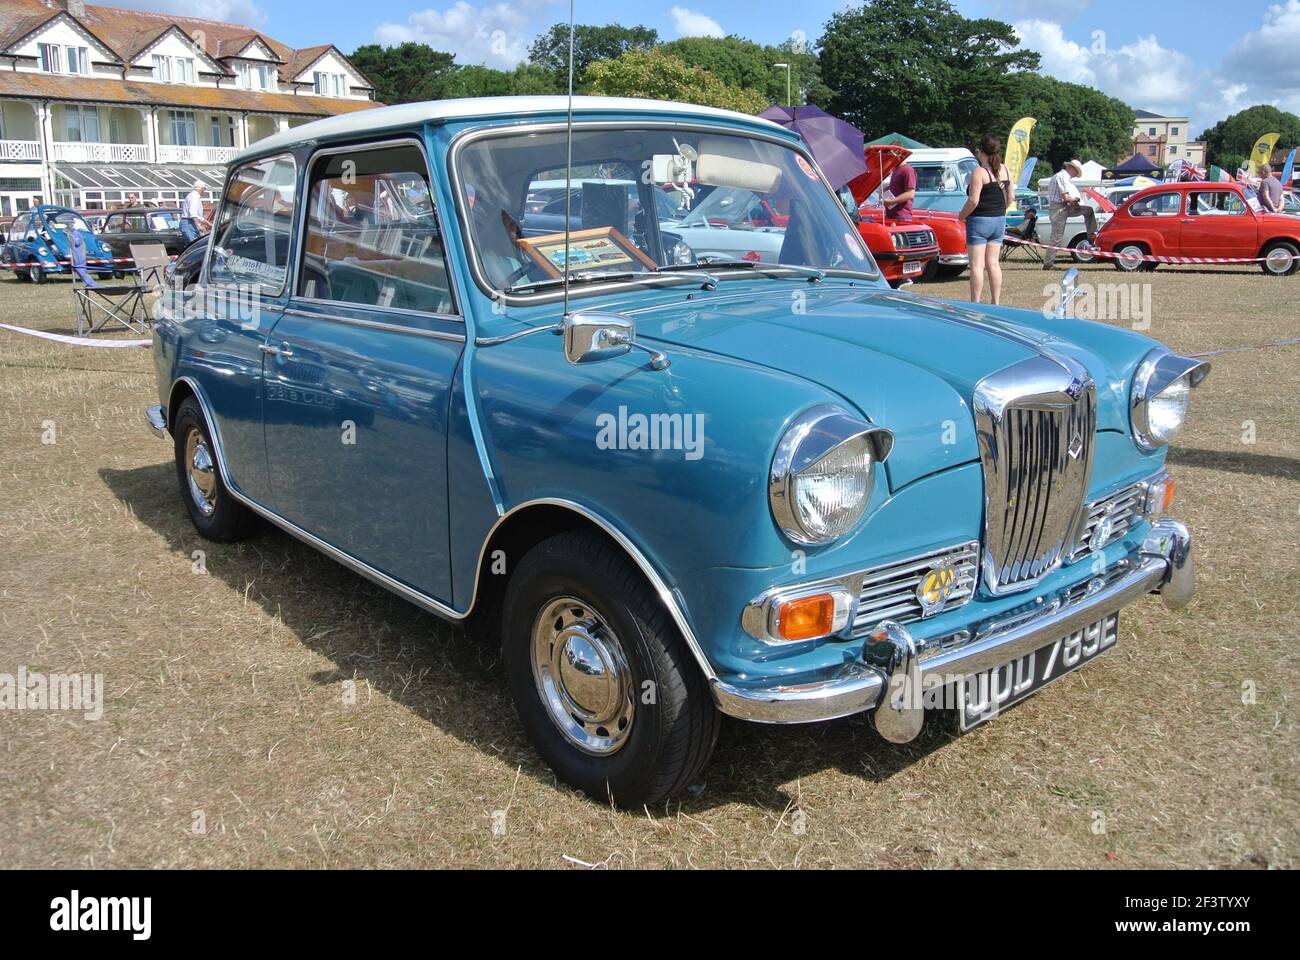 A 1967 Riley Elf parked up on display at the English Riviera classic car show, Paignton, Devon, England, UK. Stock Photo